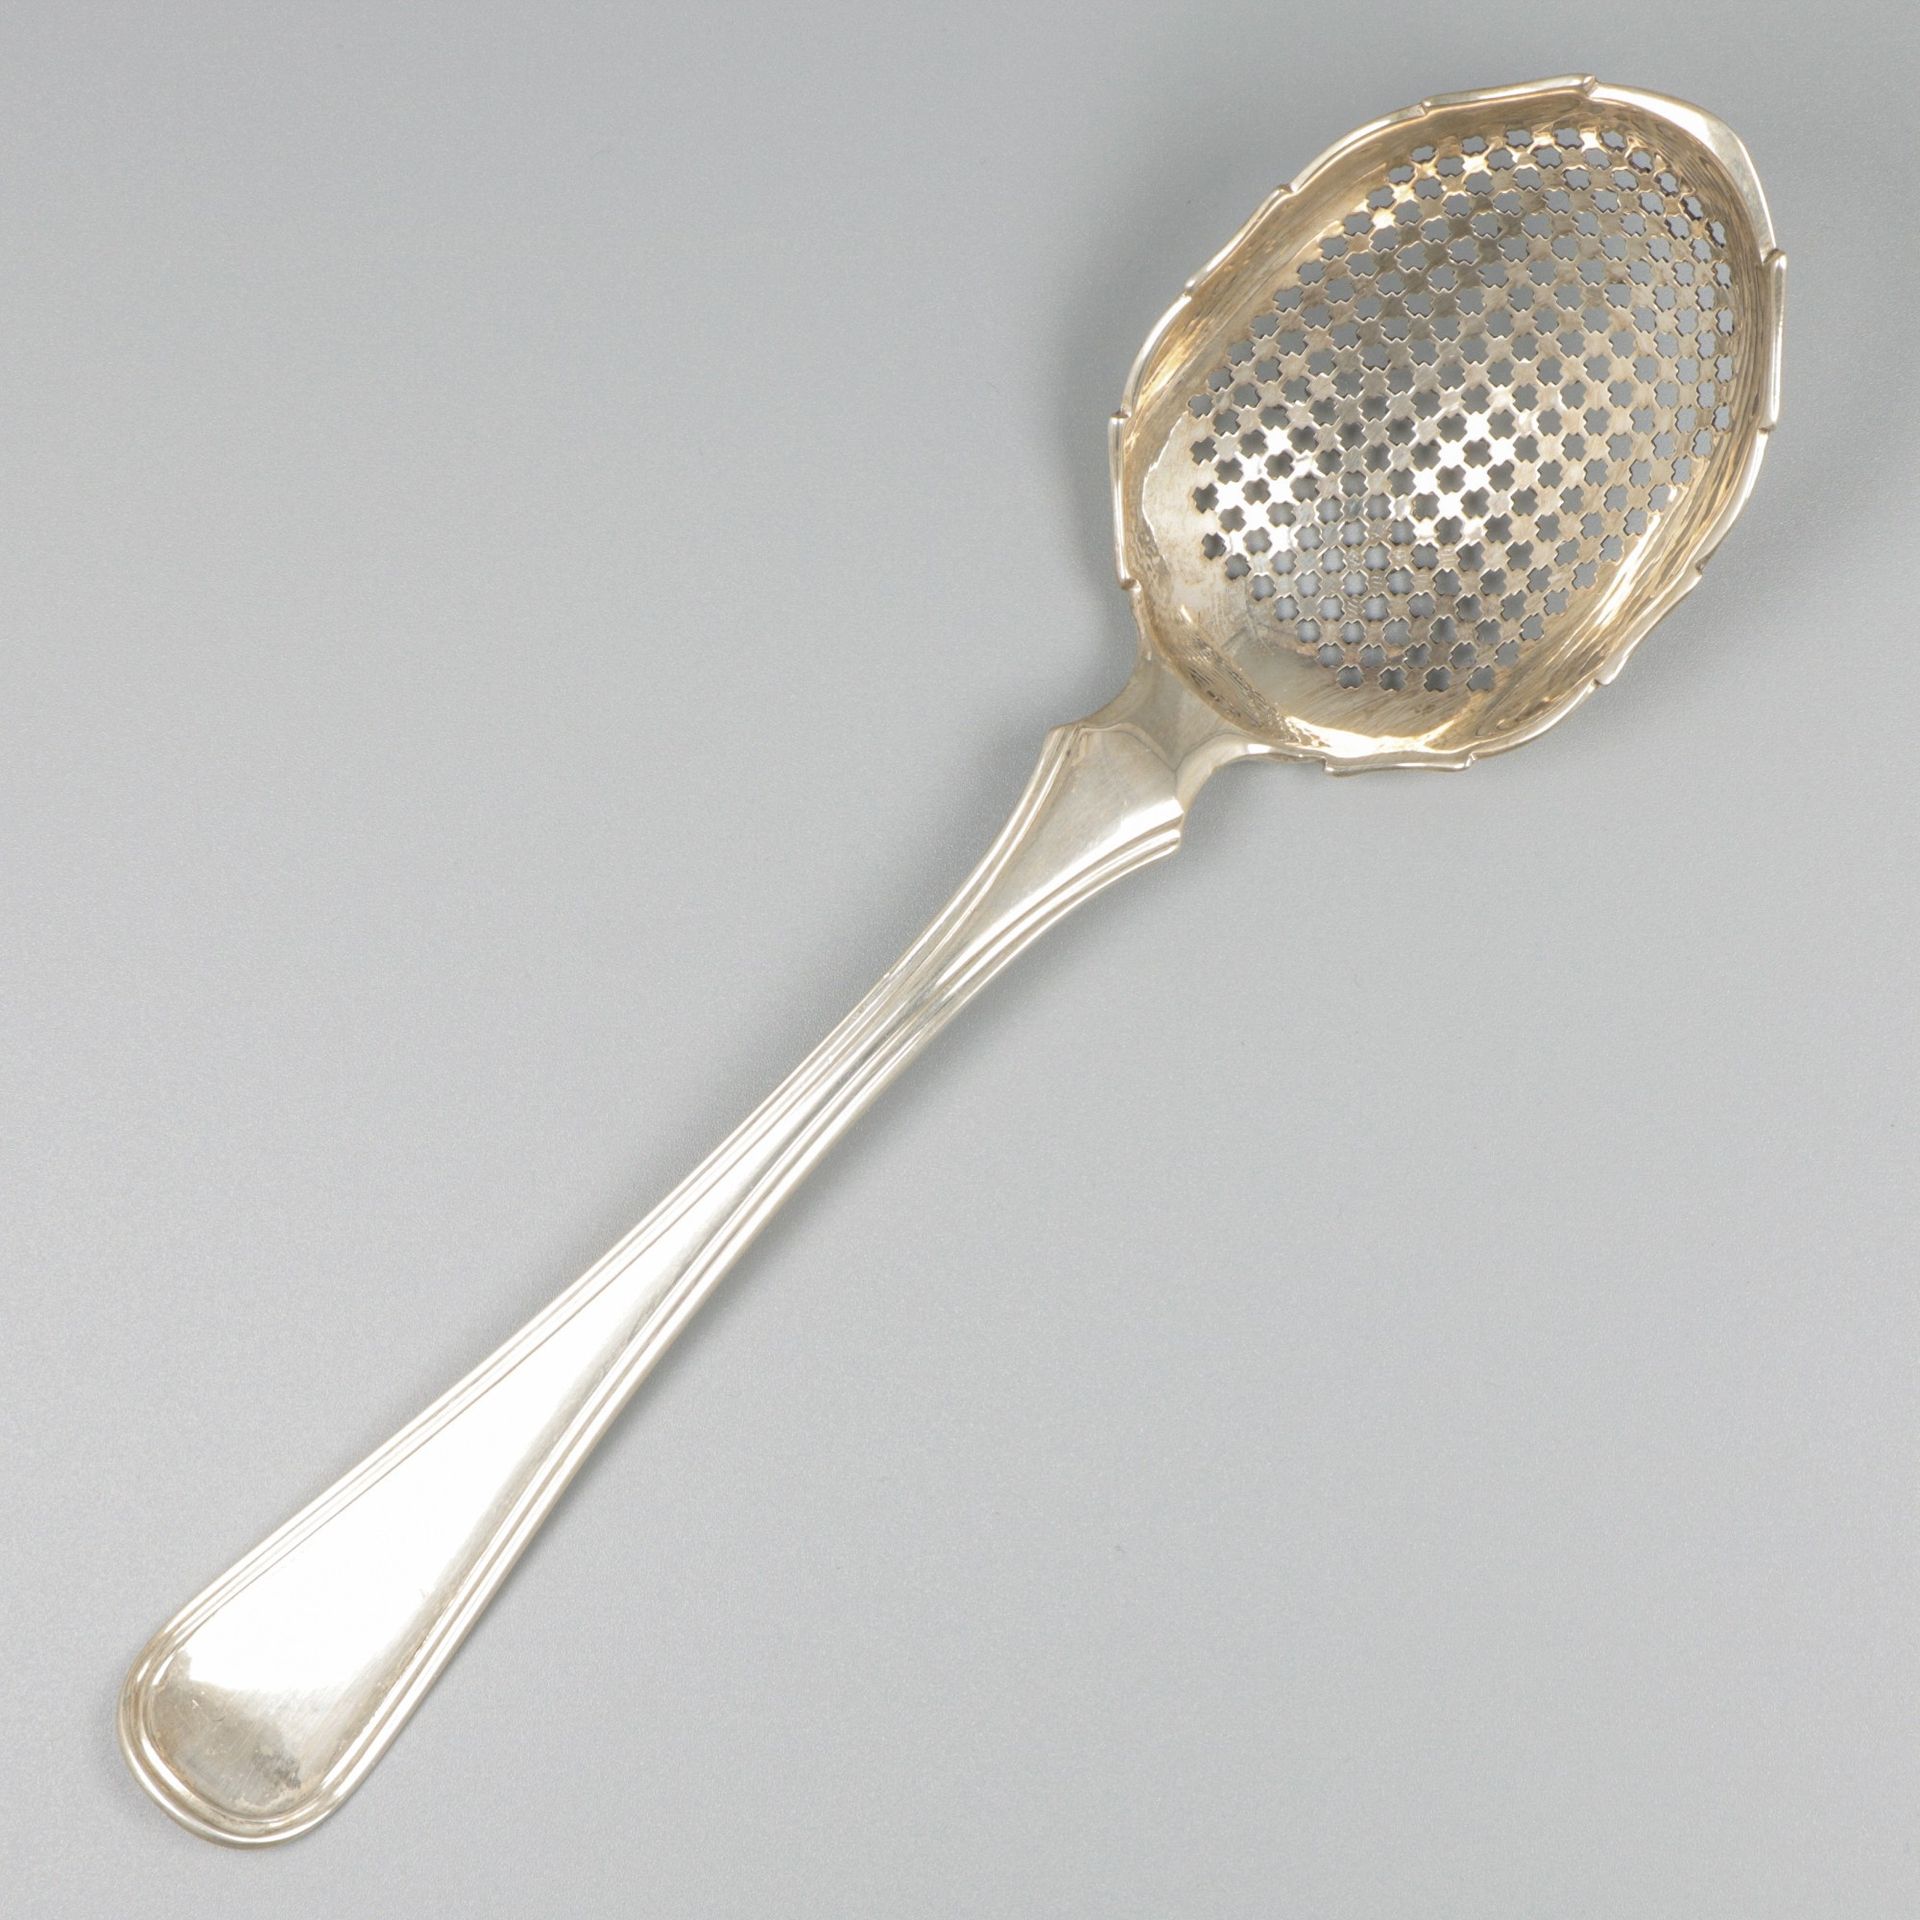 Sifter spoon silver. "Hollands Rondfilet" or Dutch Round Filet, with openwork bo&hellip;